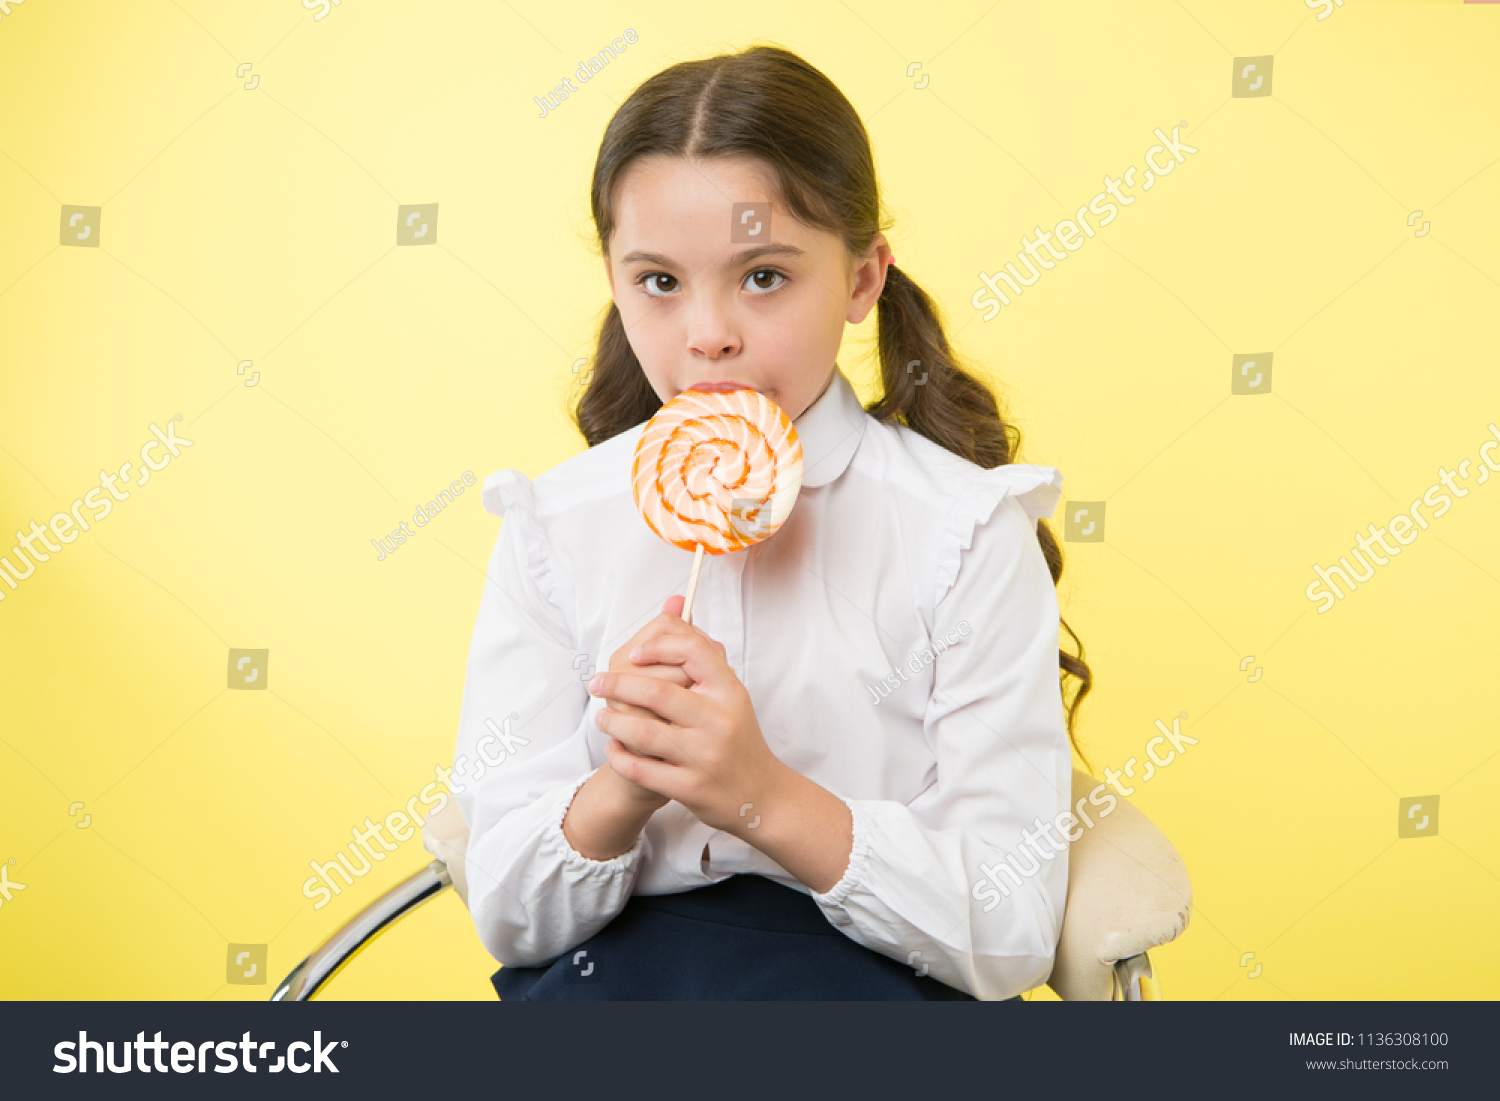 healthy eating. healthy eating and dieting concept. girl dont like healthy eating. healthy eating of little girl with lollipop. enjoying life. #1136308100